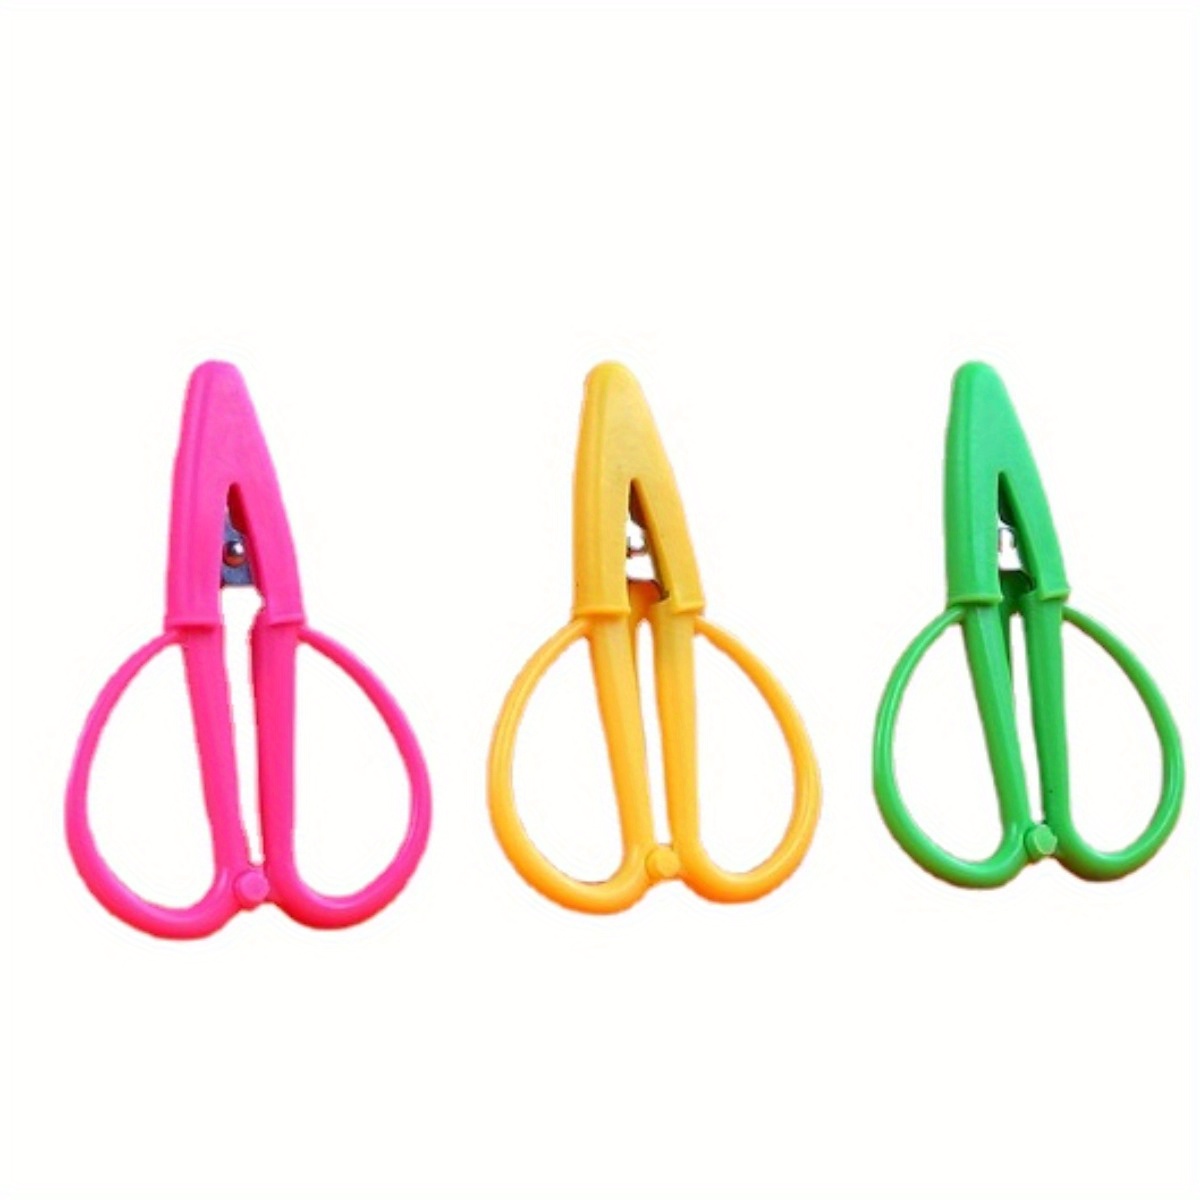  Mini Scissors Thread Tiny Scissors Colorful Travel Scissors  Back to School Sewing Small Scissors 2.56 x 1.65 Inch Embroidery Craft  Scissors with Cover, 3 Colors (9 Pcs) : Arts, Crafts & Sewing